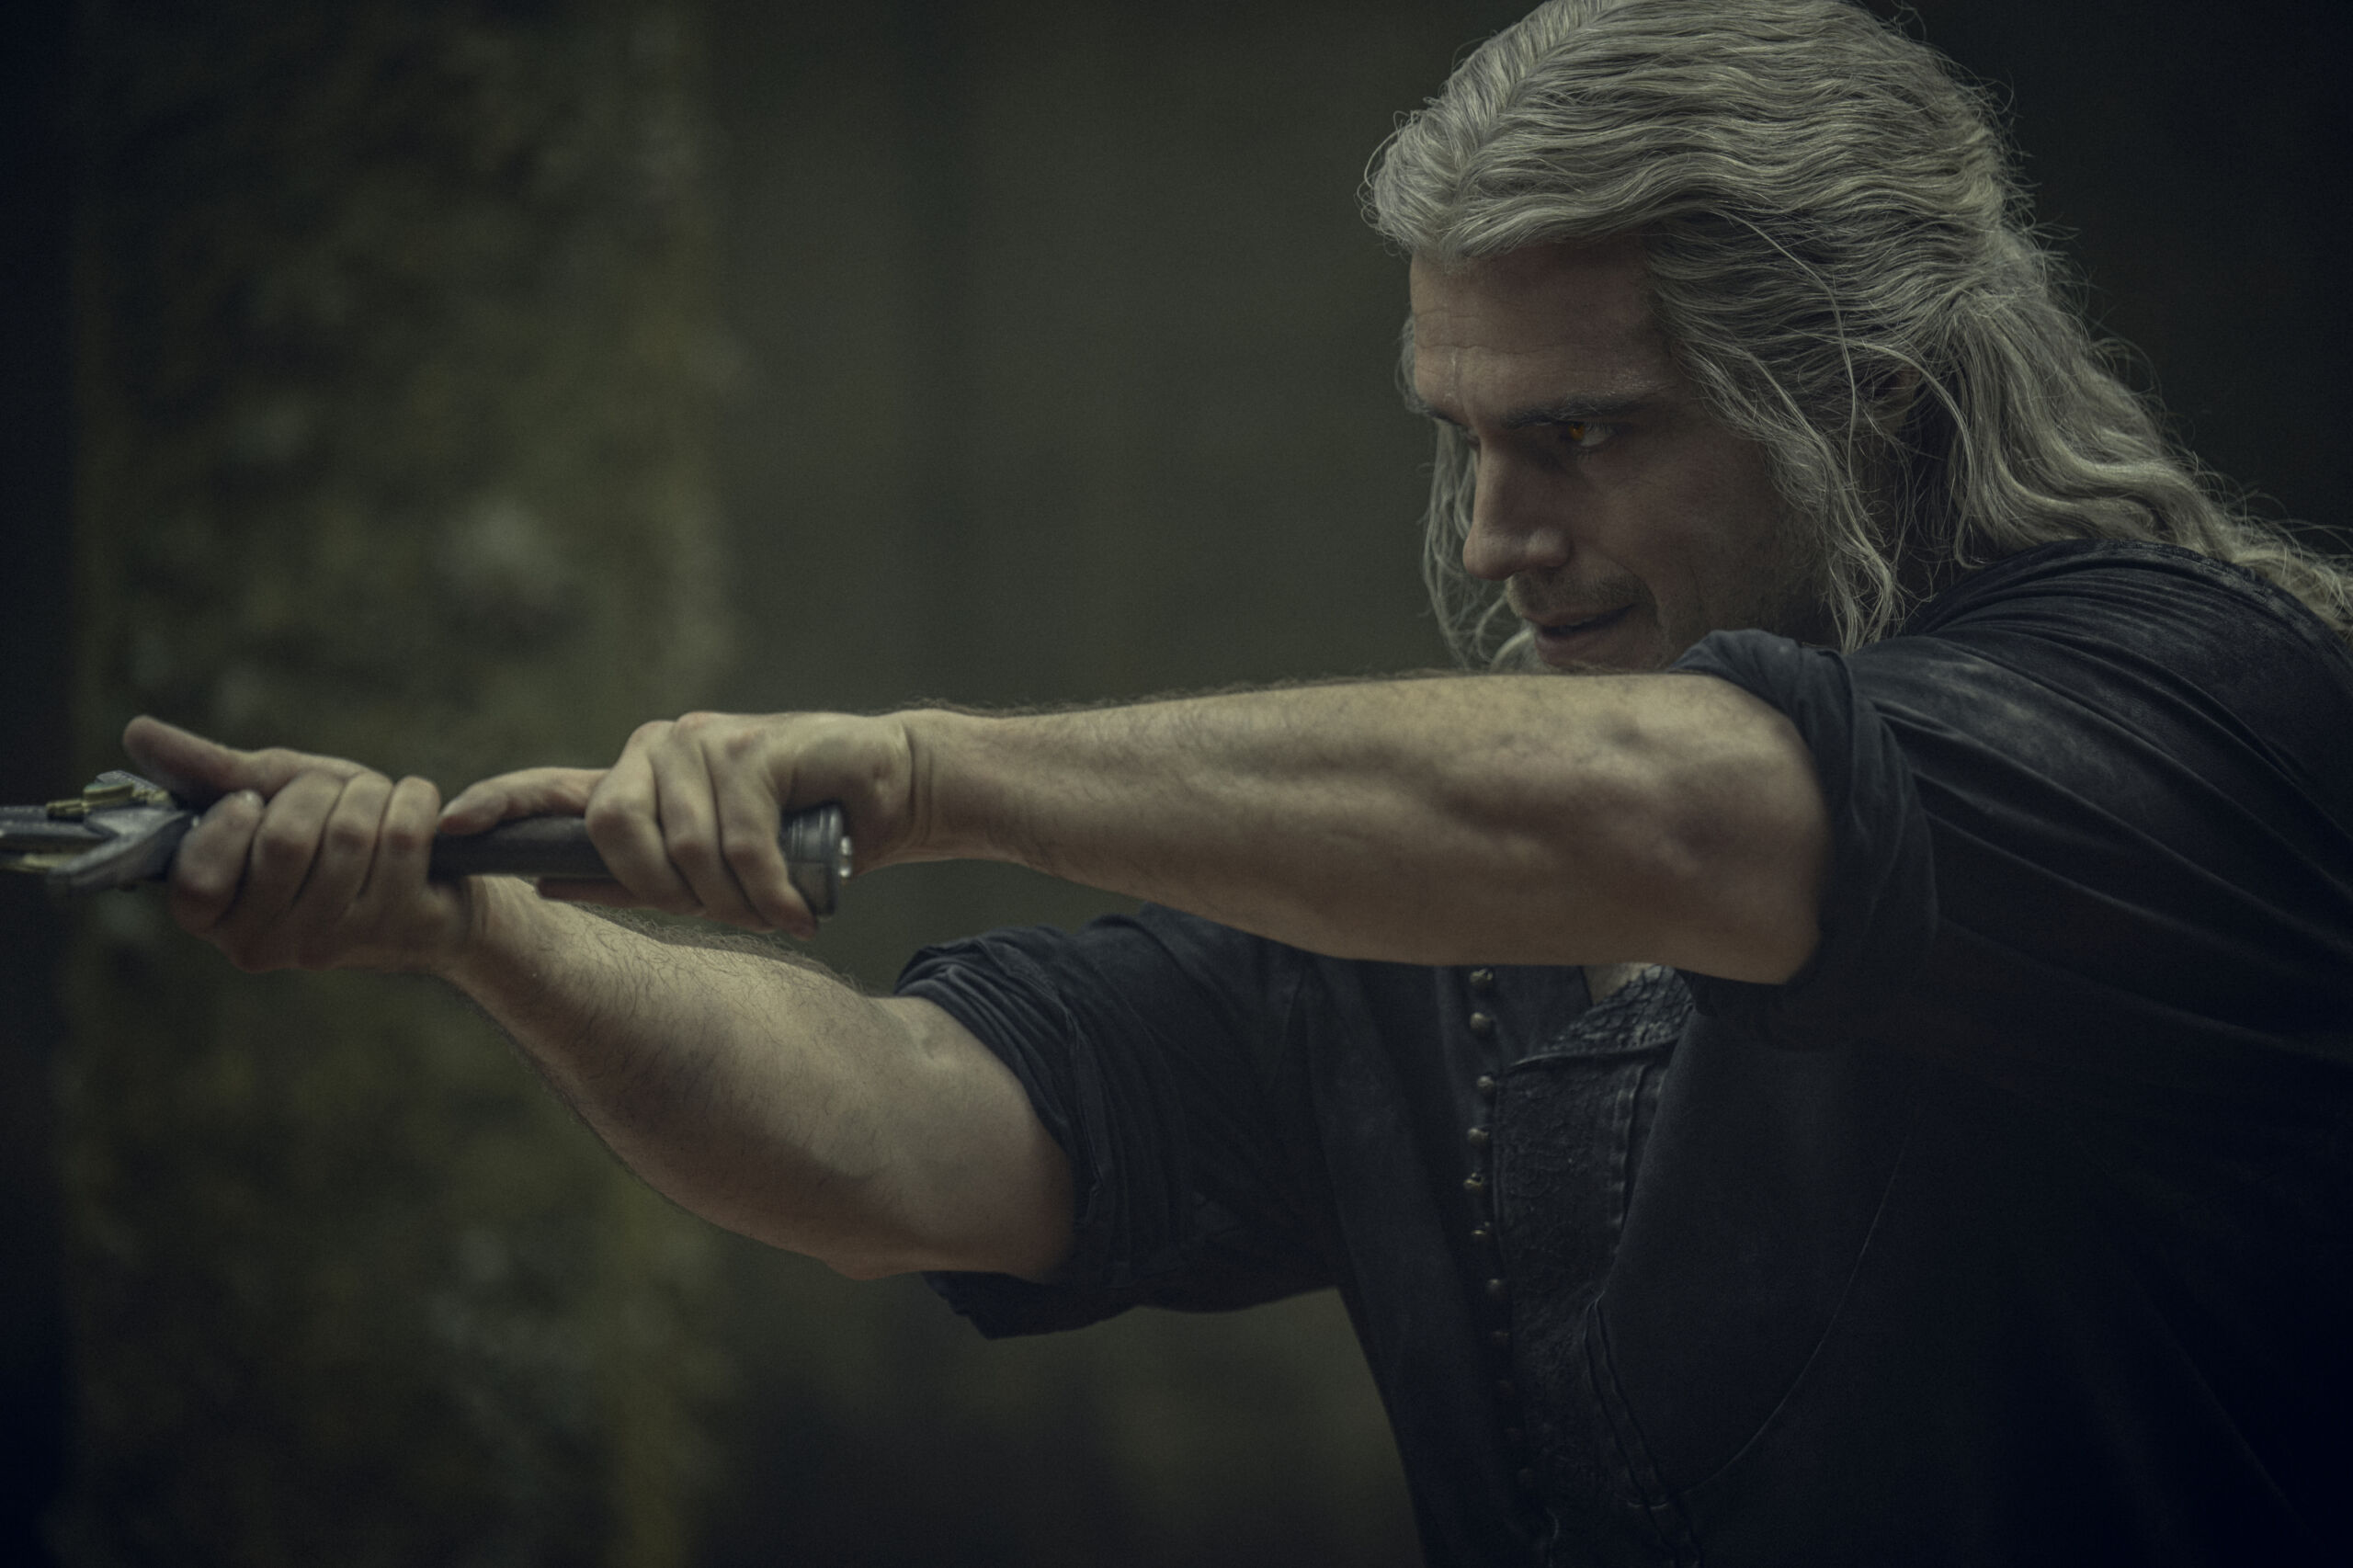 The Witcher Season 3 Trailer: Breakdown, Small Details, And Big Reveals